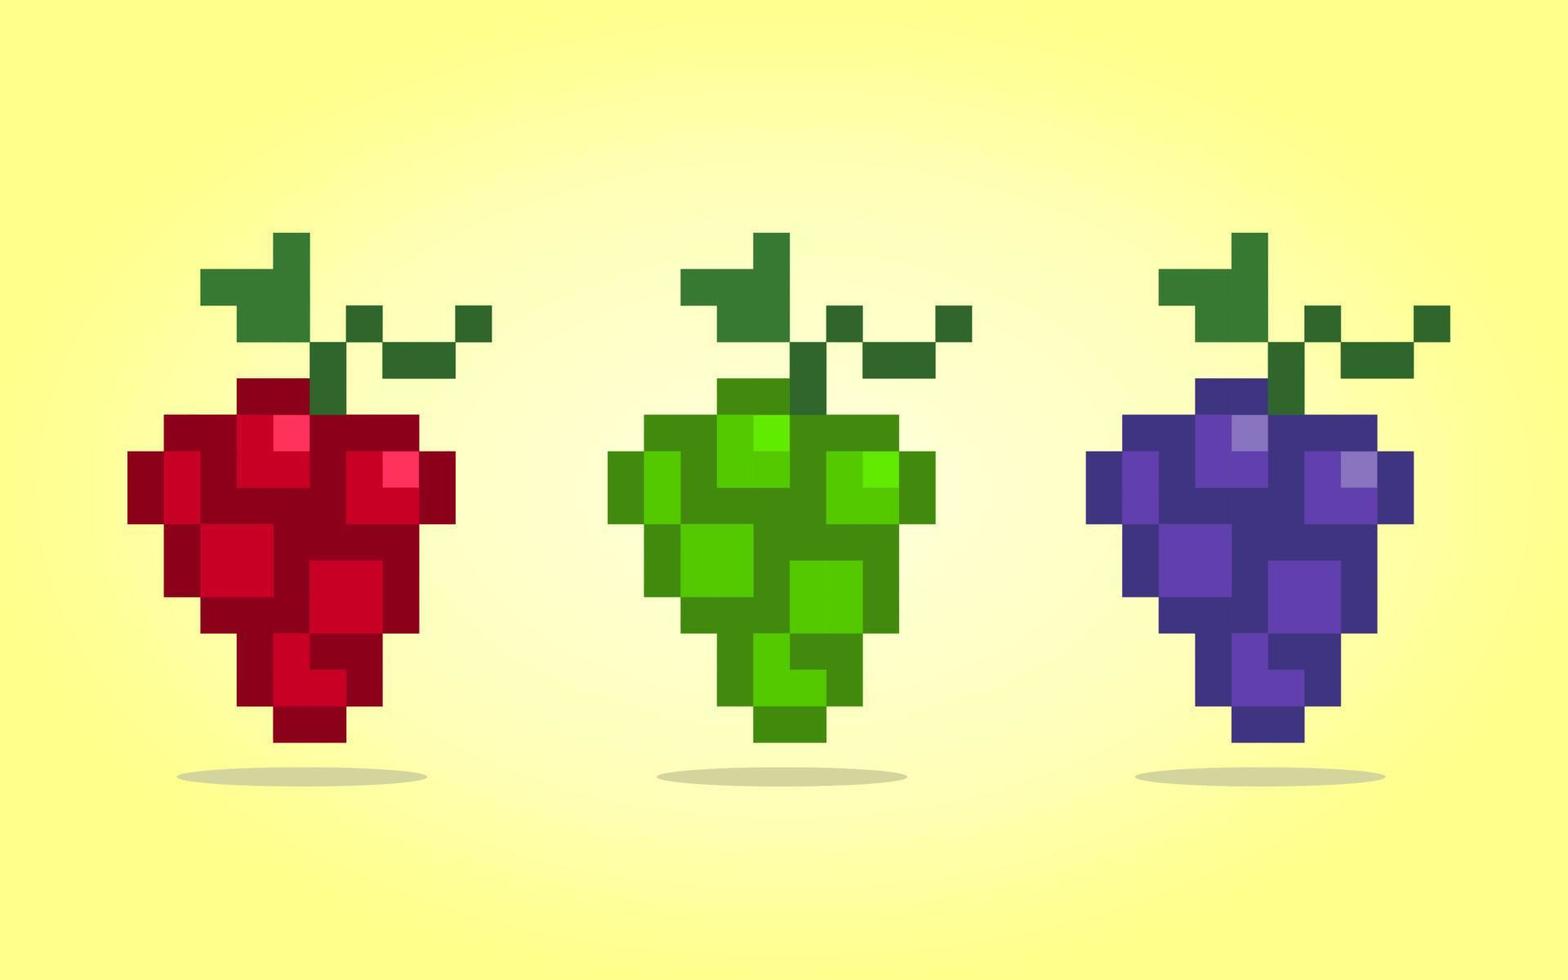 8 Bit pixels grape. The fruits for game assets and Cross Stitch patterns in vector illustrations.